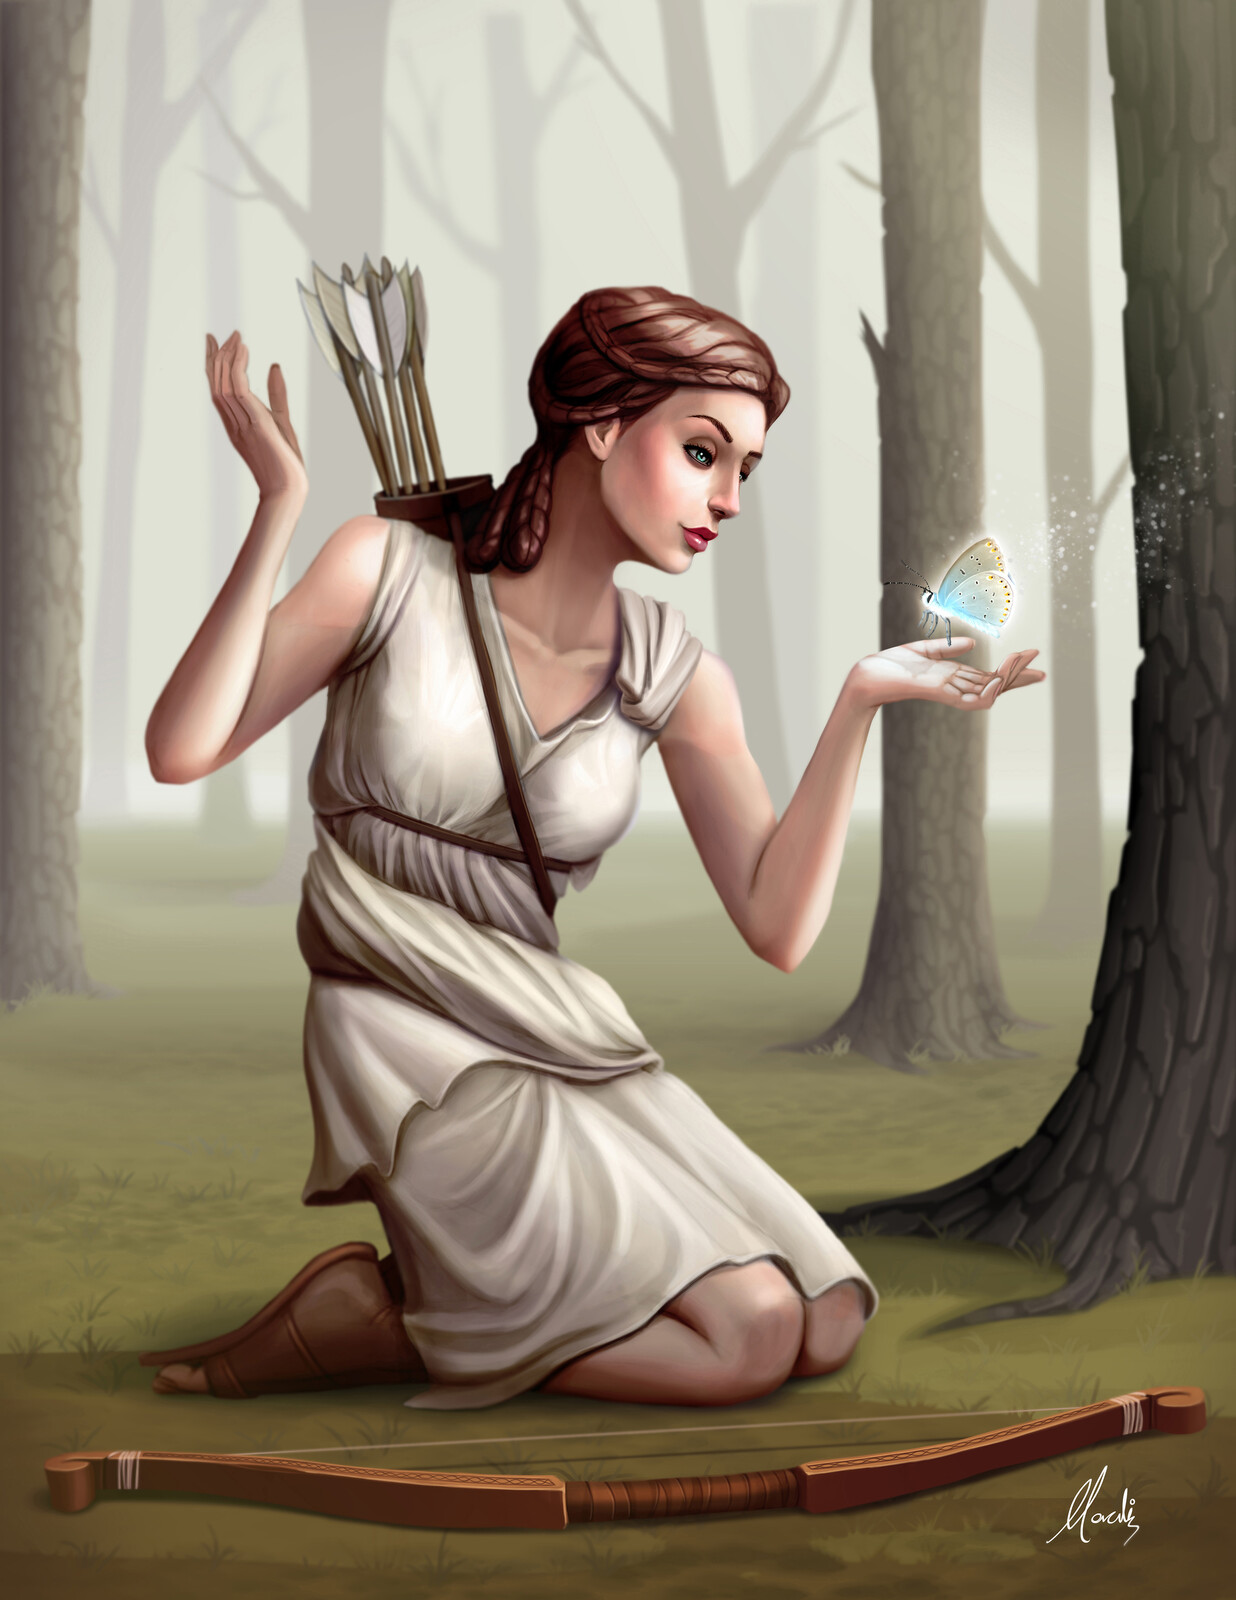 This is the final illustration of Artemis